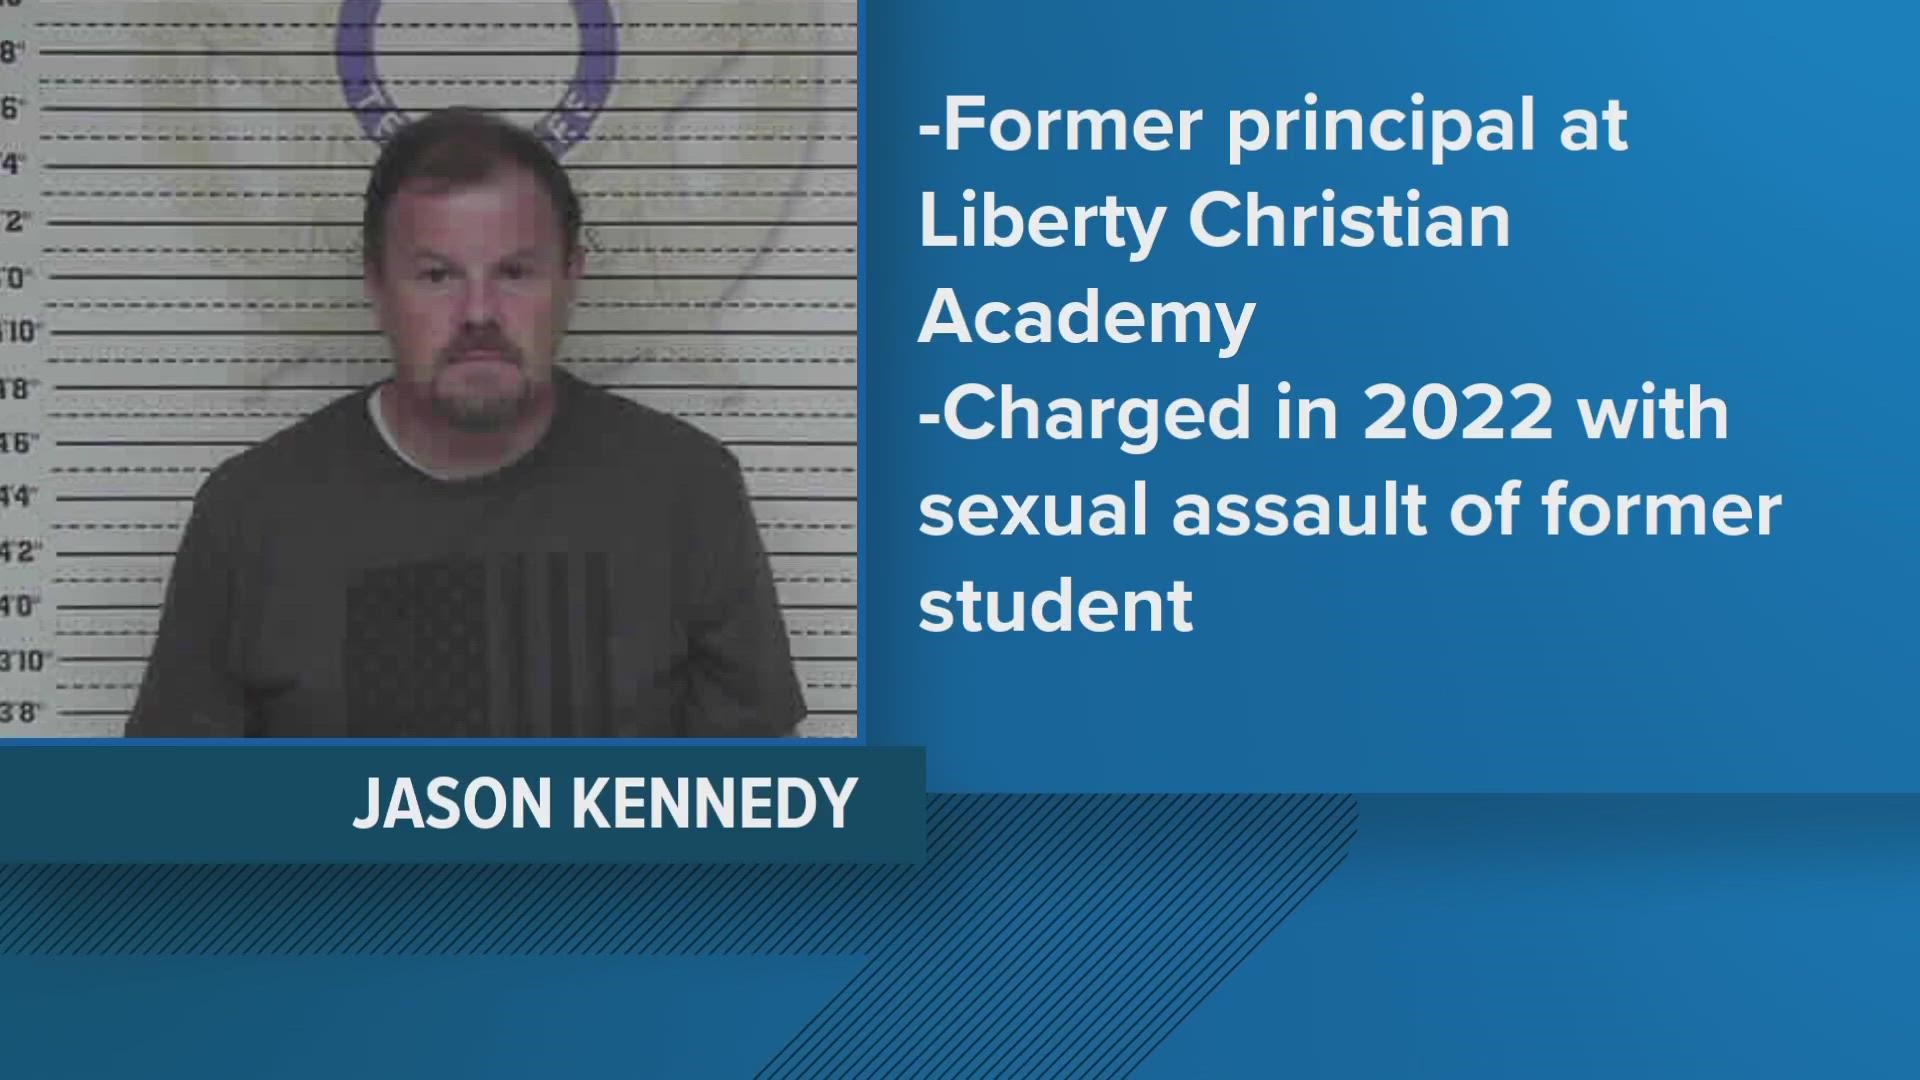 A McMinn County grand jury returned 11 new charges against Kennedy for sex crimes involving at least four children, including one child under 13 years old.